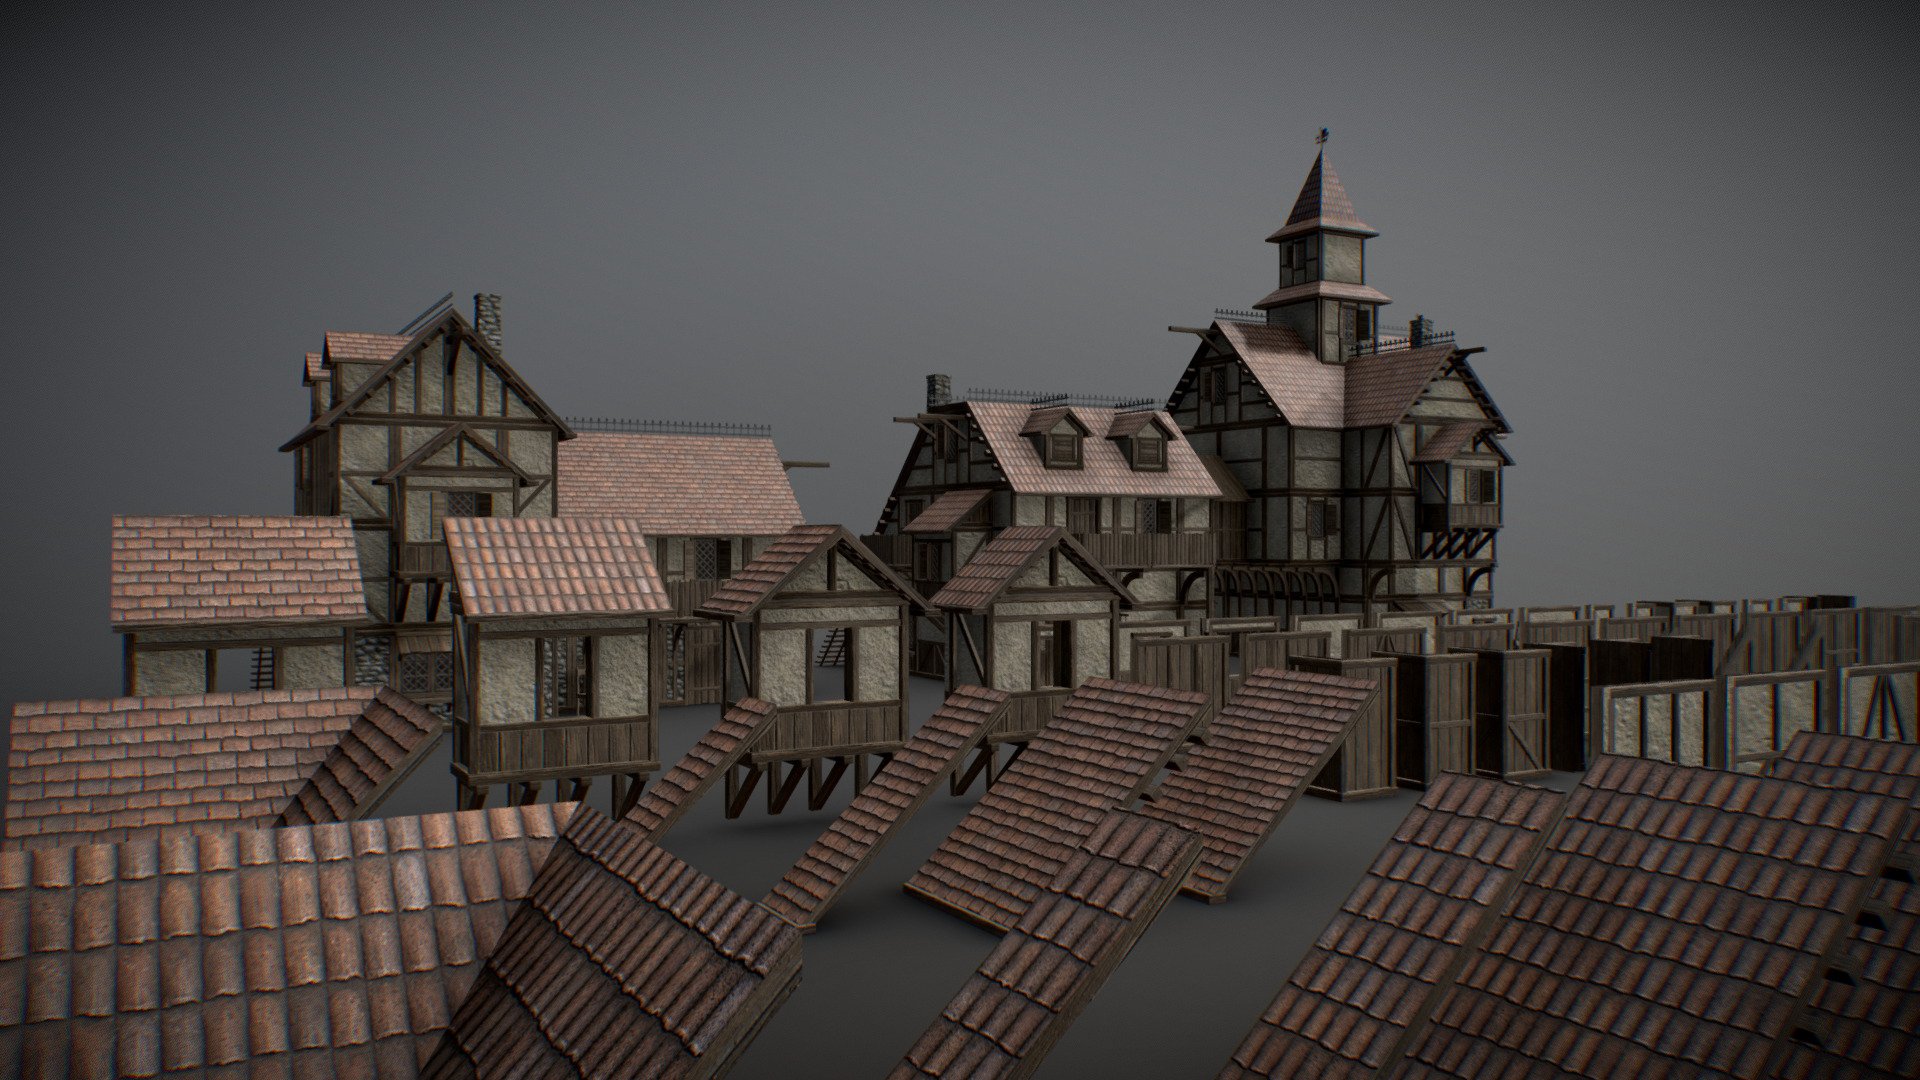 Pre-setup files for Unreal Engine 5, Maya Arnold and Blender in the additional file.
Unity coming soon.
Blender files makes use of the Asset Browser for easy use.

This Asset pack contains tons of medieval walls and other pieces to make your own medieval houses for your scene, film, game, etc&hellip;
it also contains:
* Couple of props to place in the houses or on the street. (there will be more props added through time for free for those who purchased this pack)
* Vegetation like tree's and grass.
* Materials so you can make your own models with these textures.
* Presets (pre-made buildings, more will be added in the near future)

Thanks for purchasing my Modular Asset Pack, if you have questions or request for models for this pack, comment below 3d model